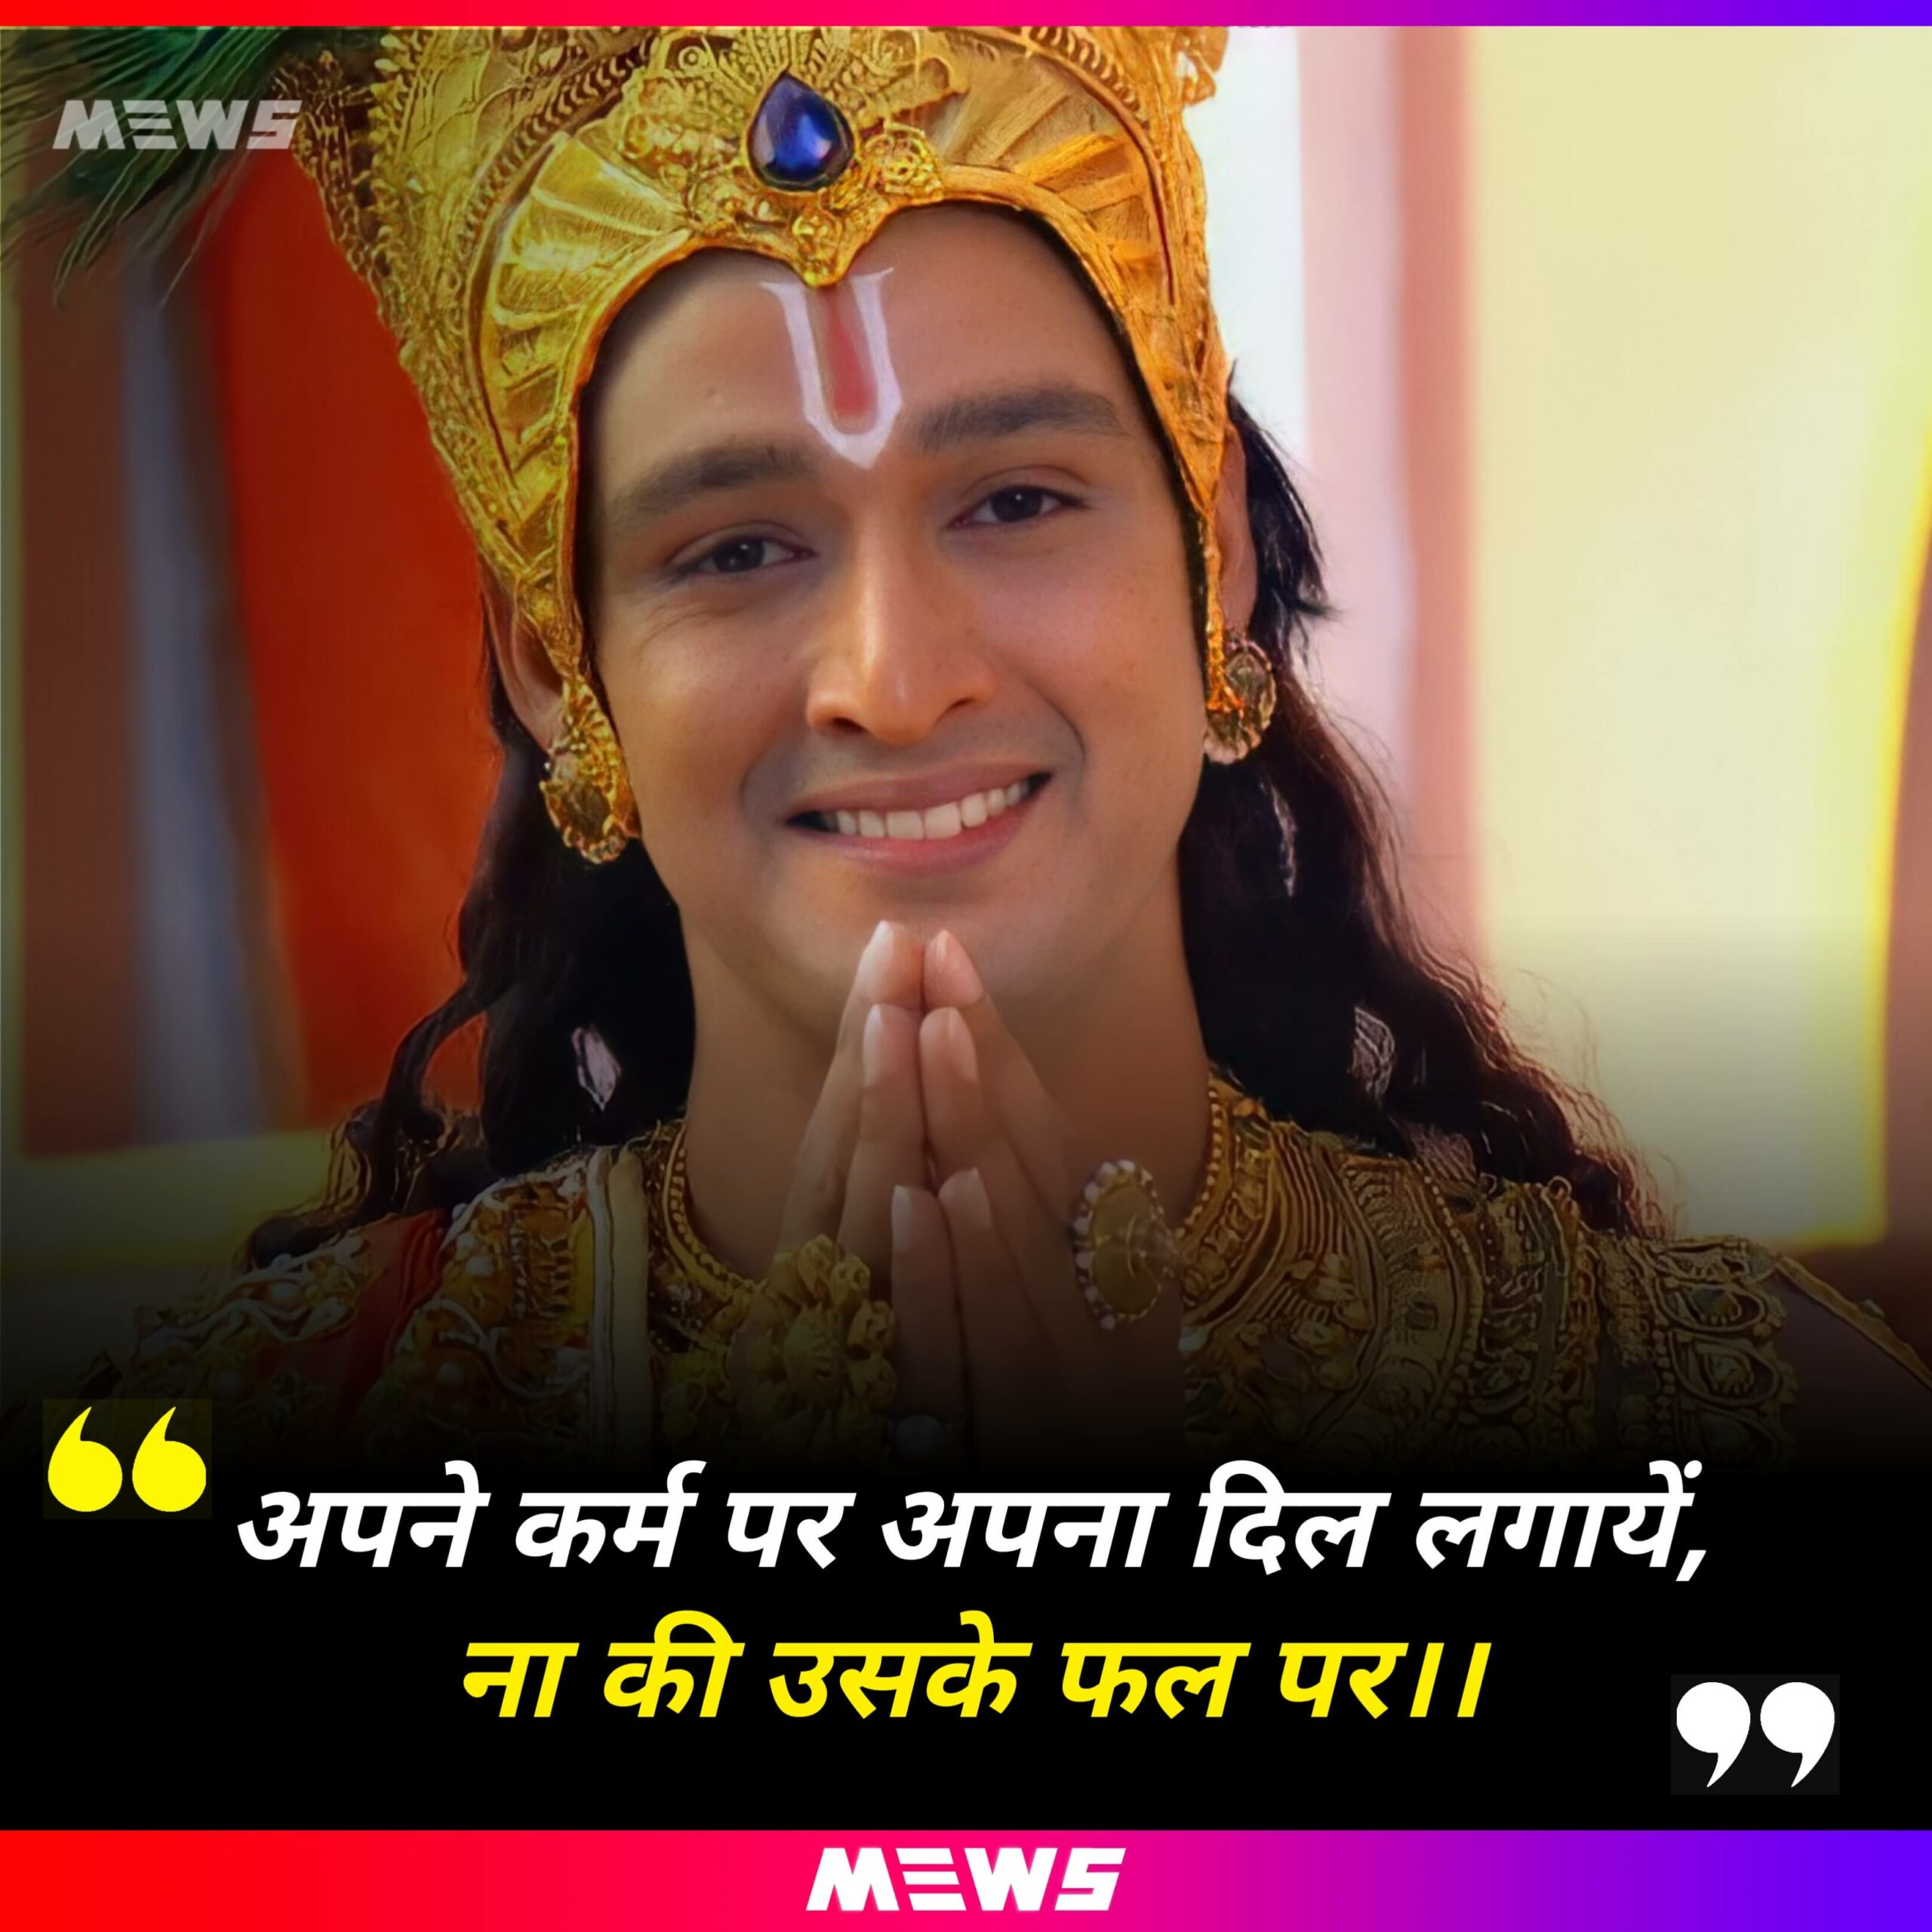 Quotes by Lord Krishna in Hindi